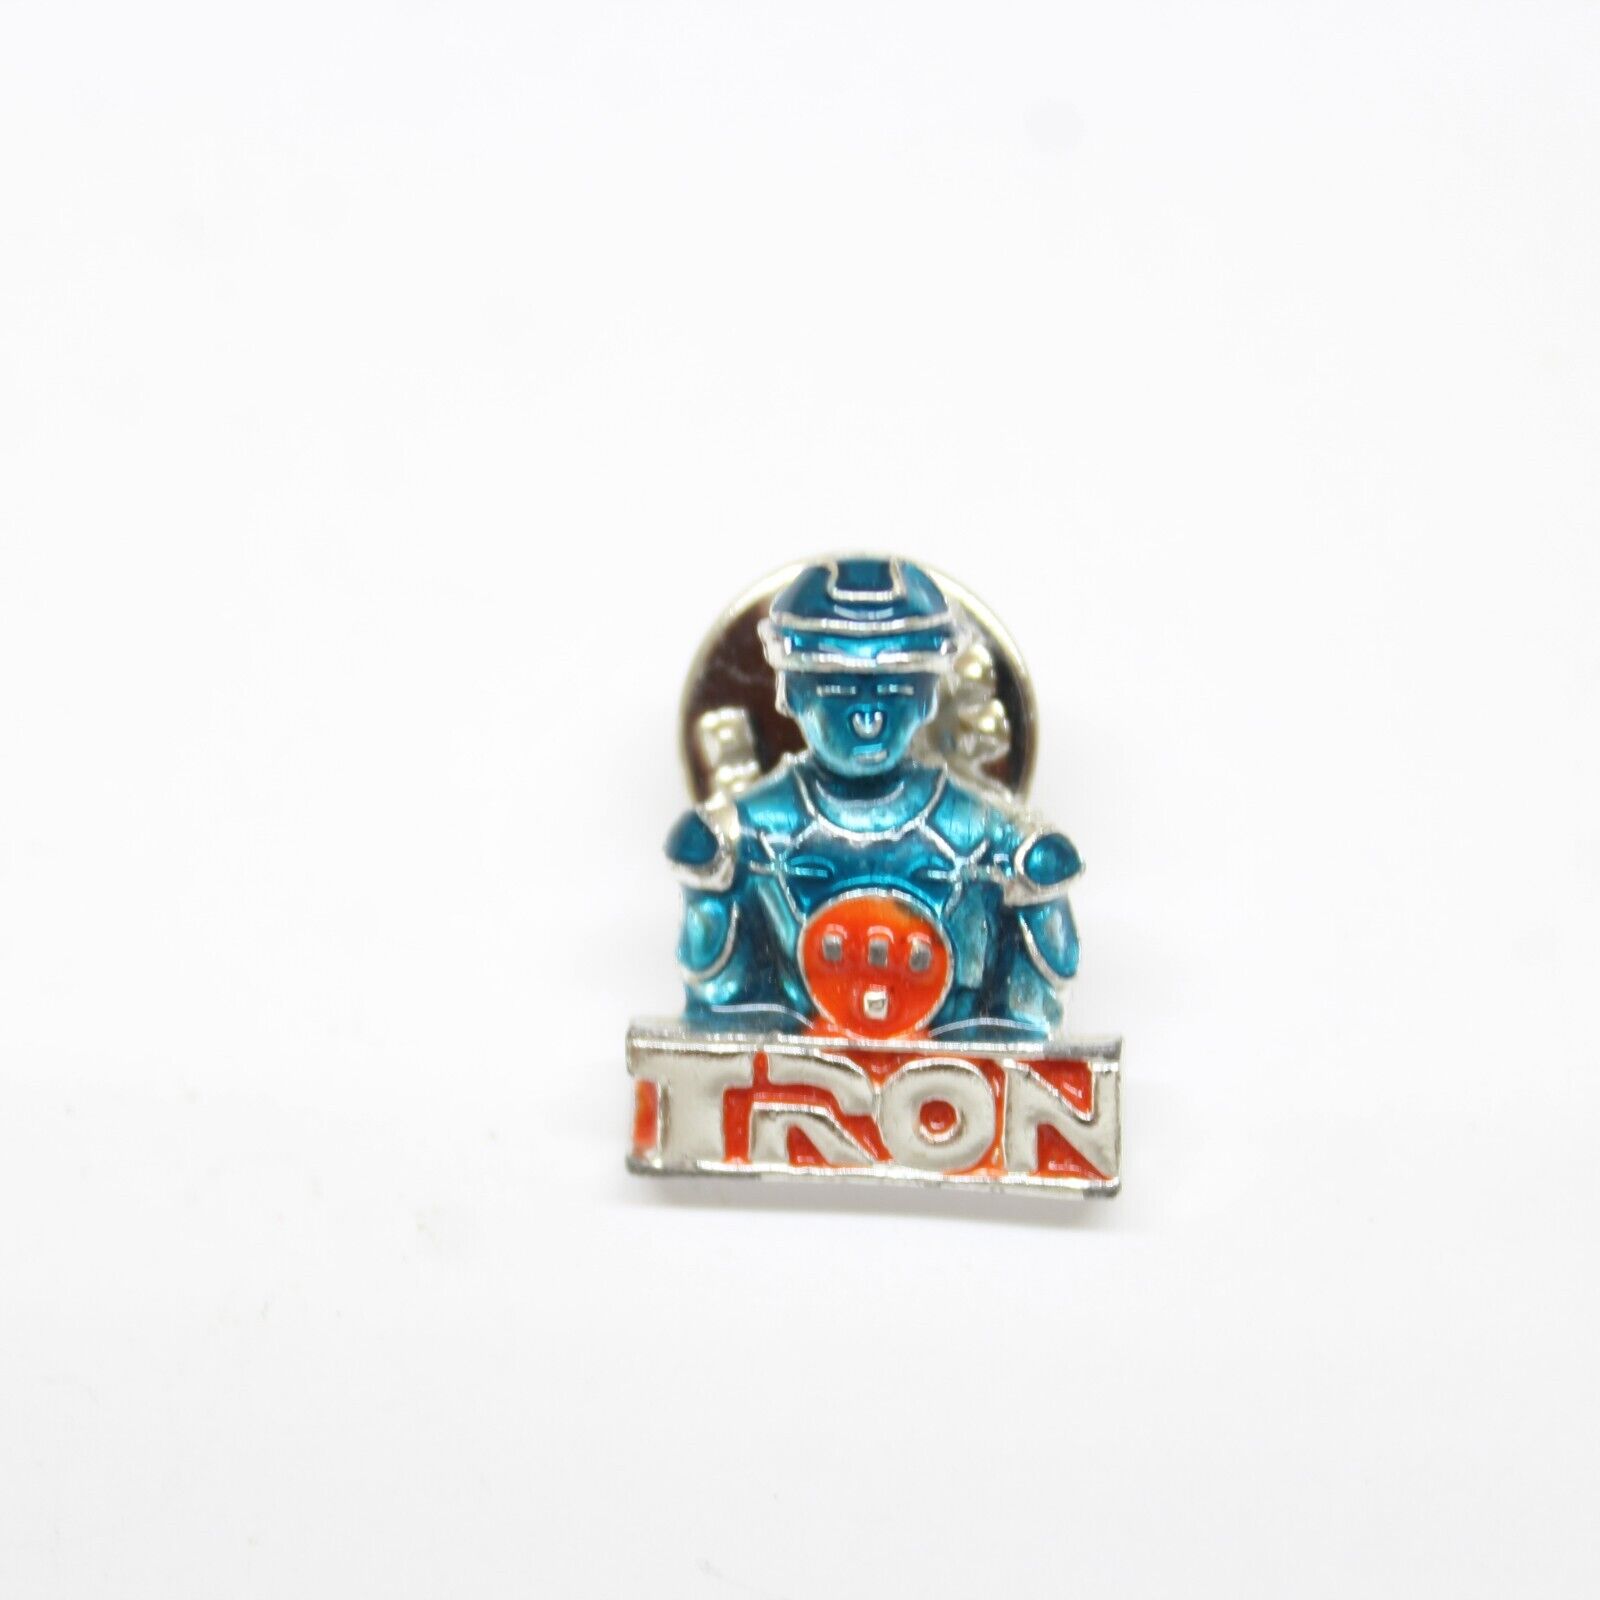 Tron Jewelry Pin 1982 Head Bust Pin Lapel Enamel Collectible